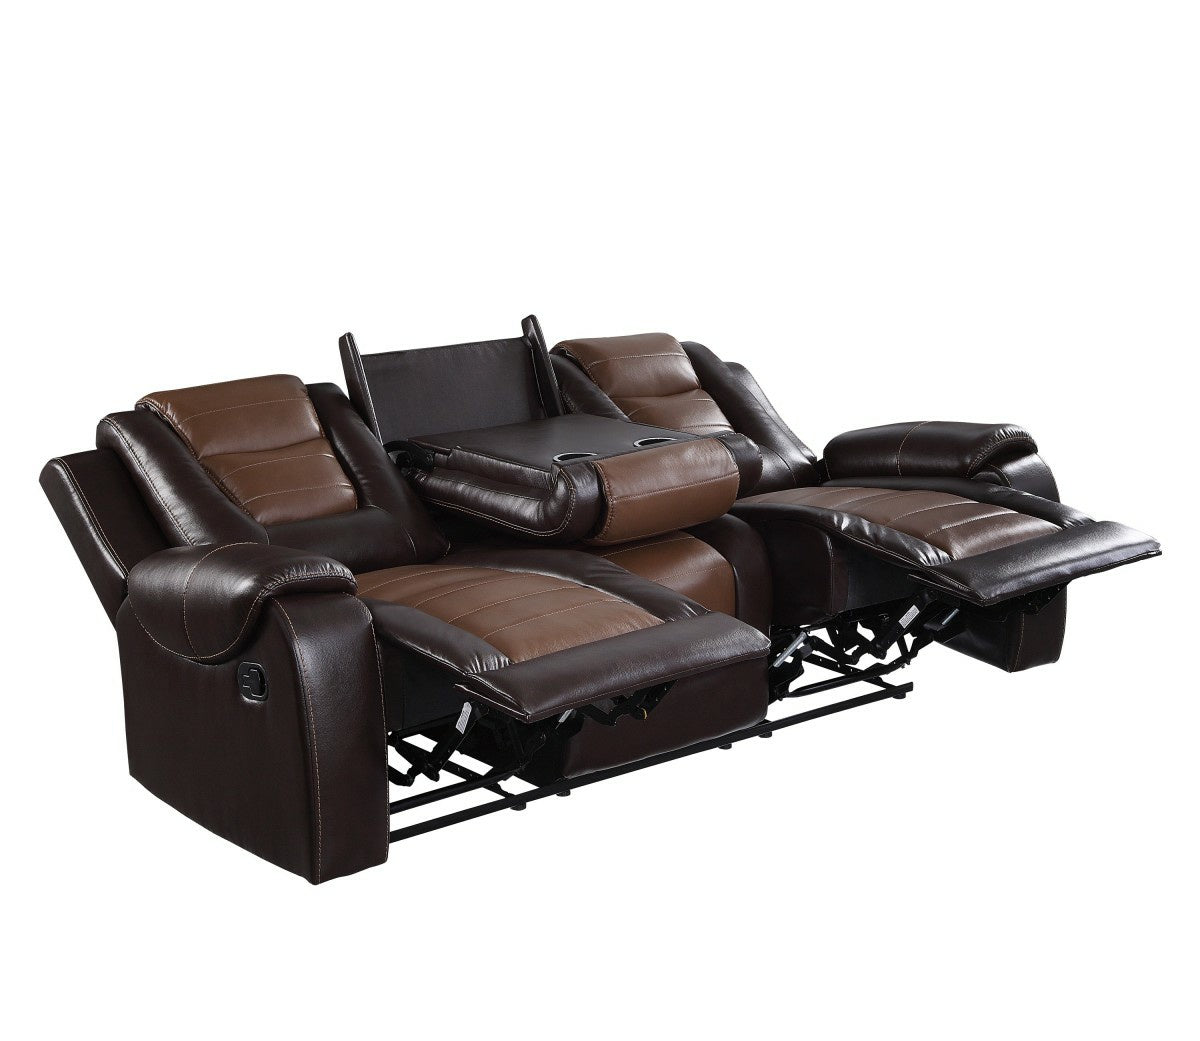 Briscoe Brown Reclining Sofa and Loveseat 9470